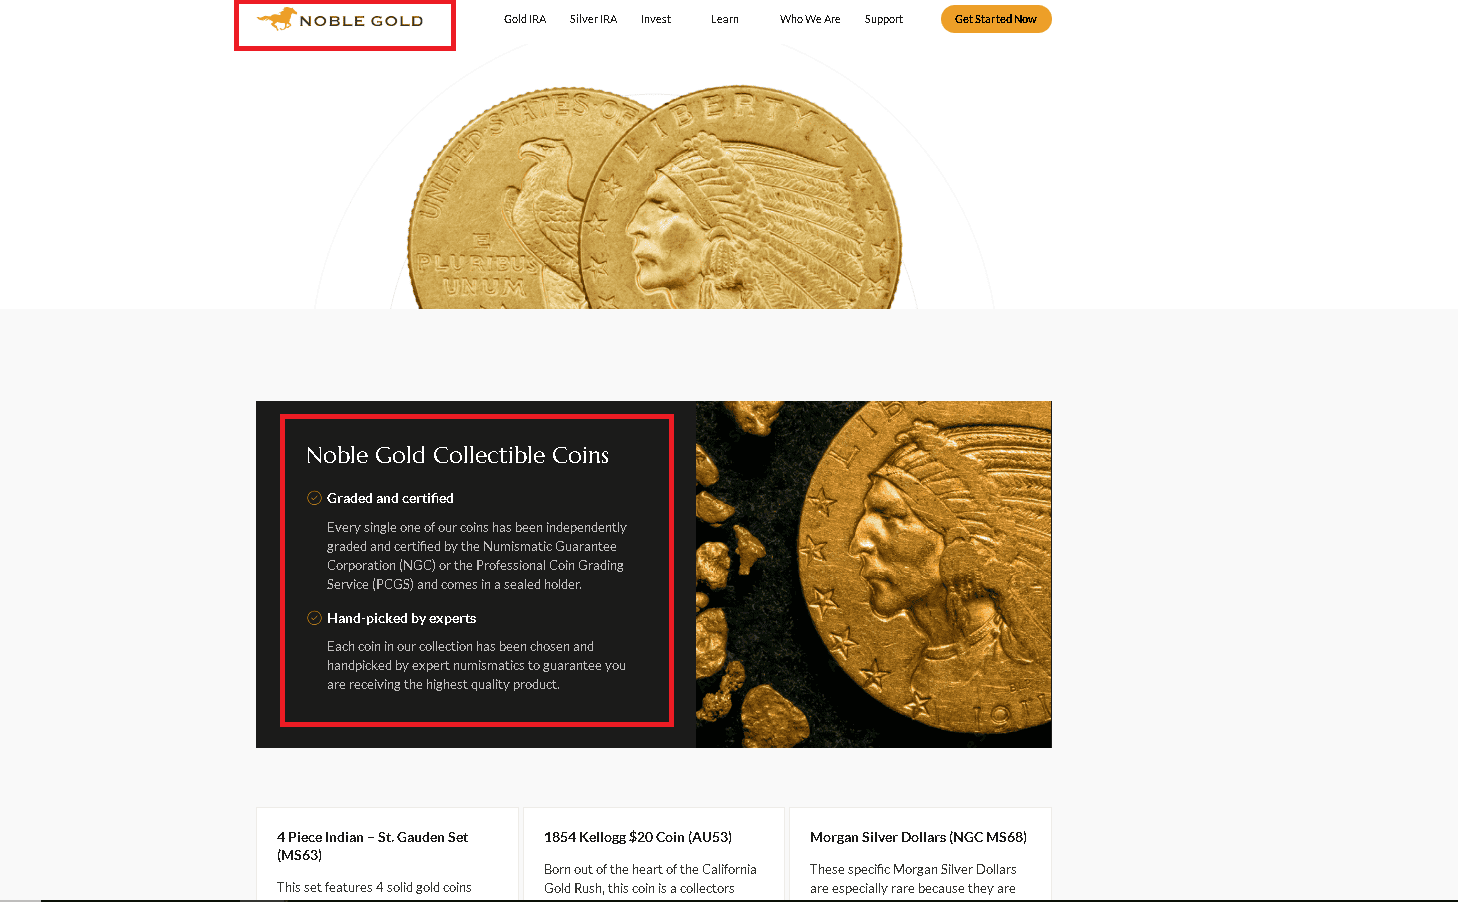 Noble Gold Investments sell rare and numismatic coins